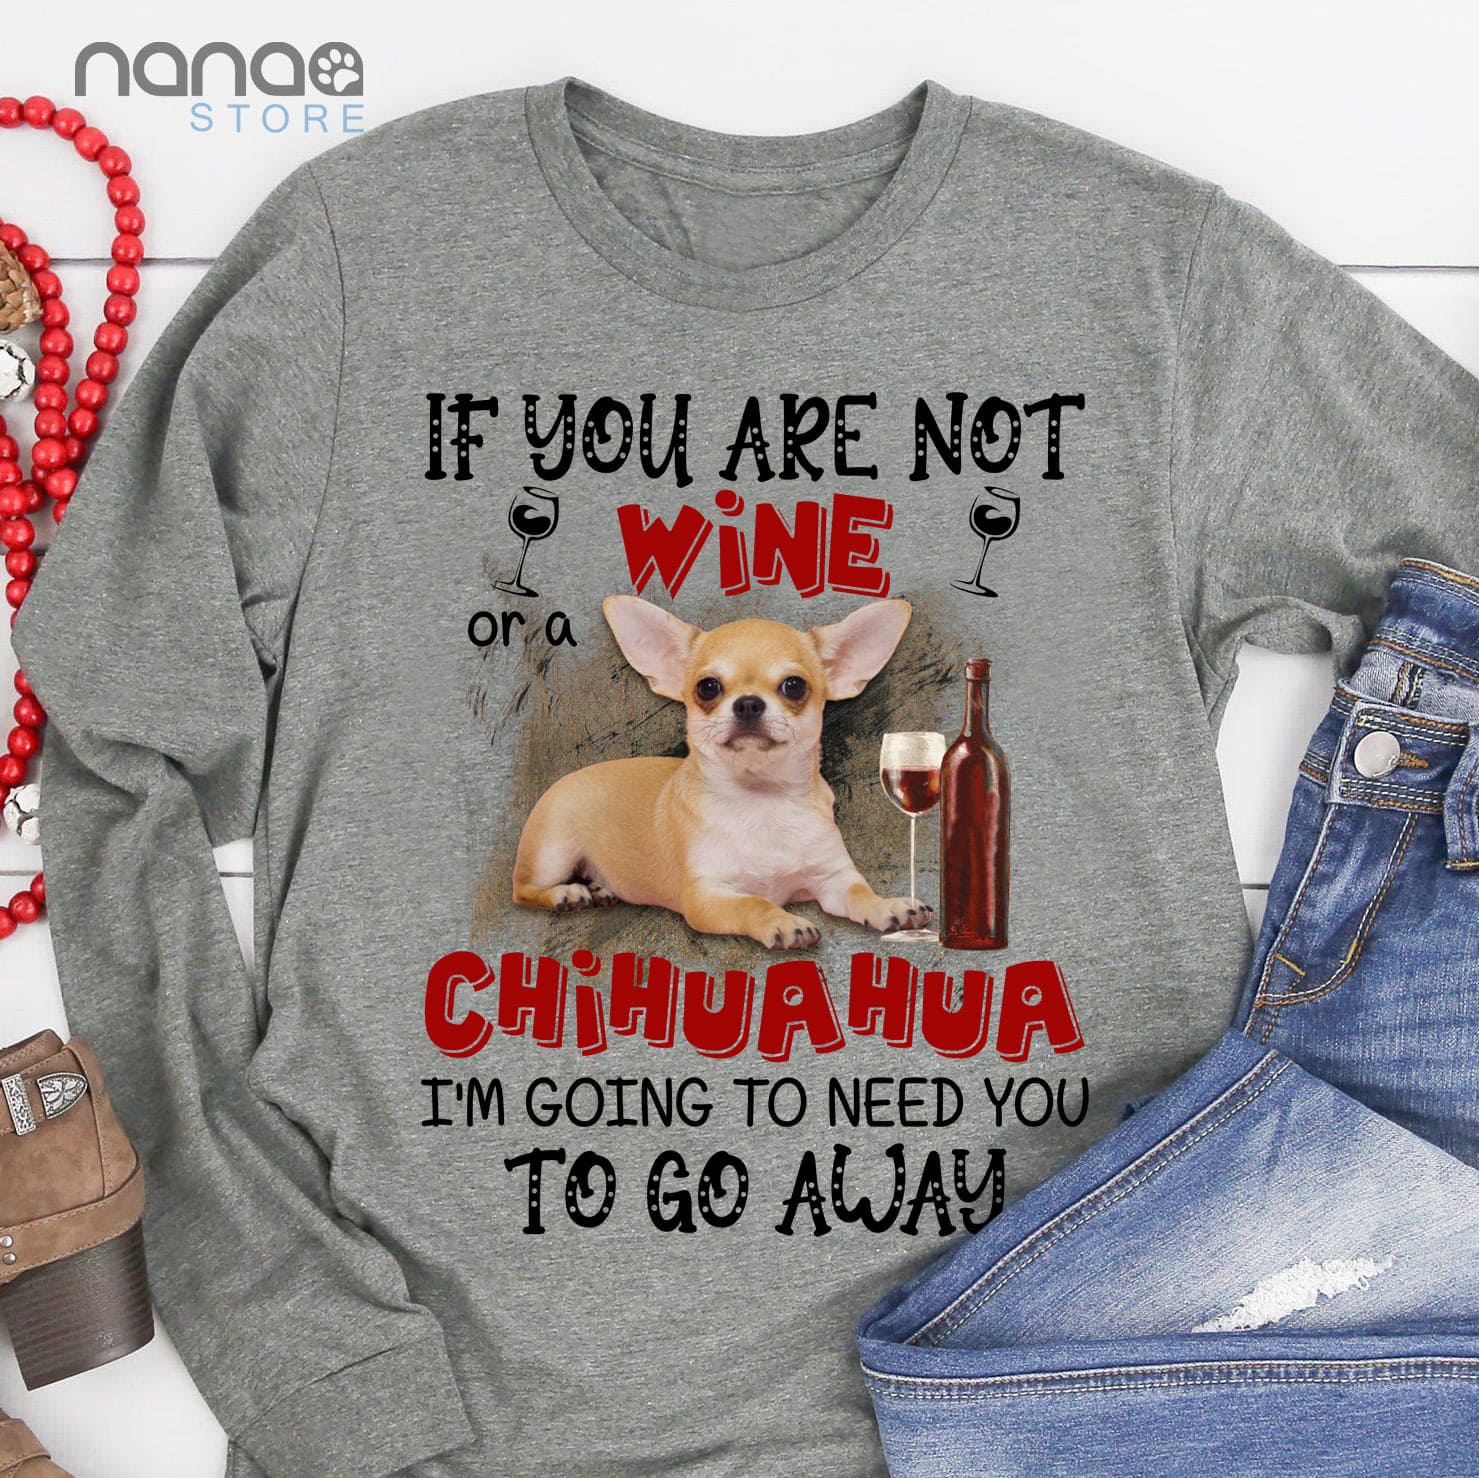 Chihuahua Wine - If you are not wine or a chihuahua i' going to need you to go away